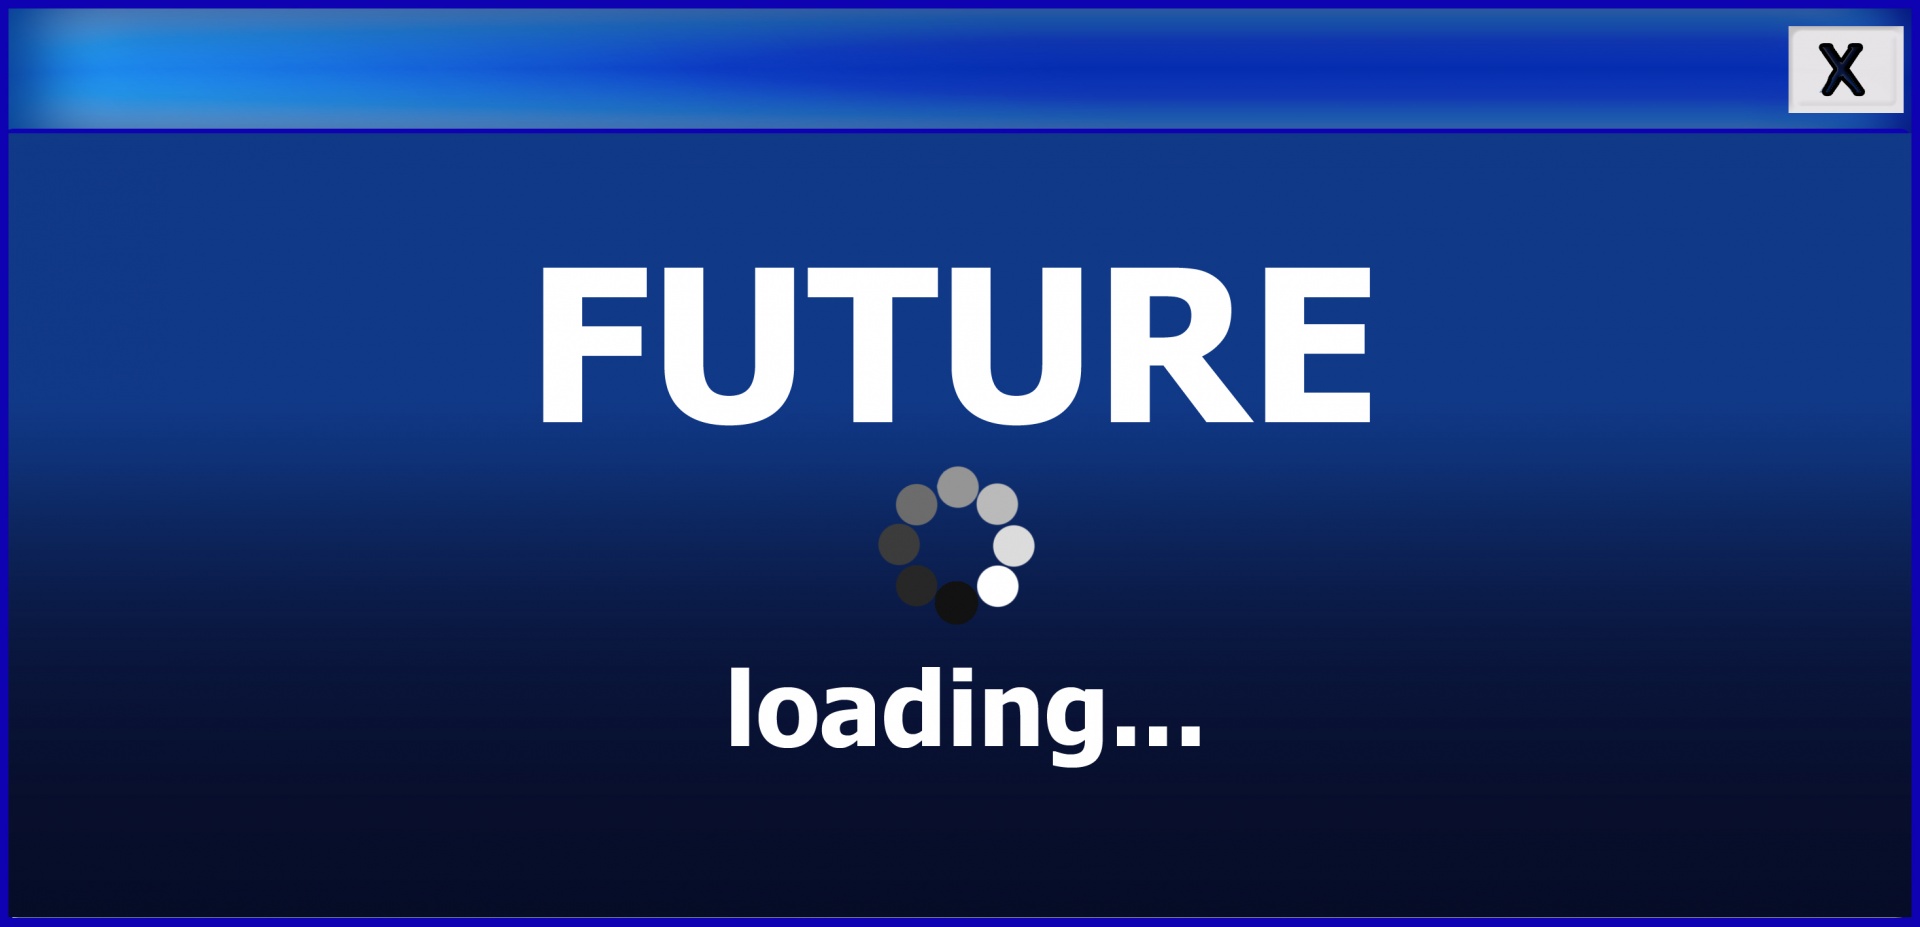 Computer screen window with the word "FUTURE", the loading icon and the word "loading..."